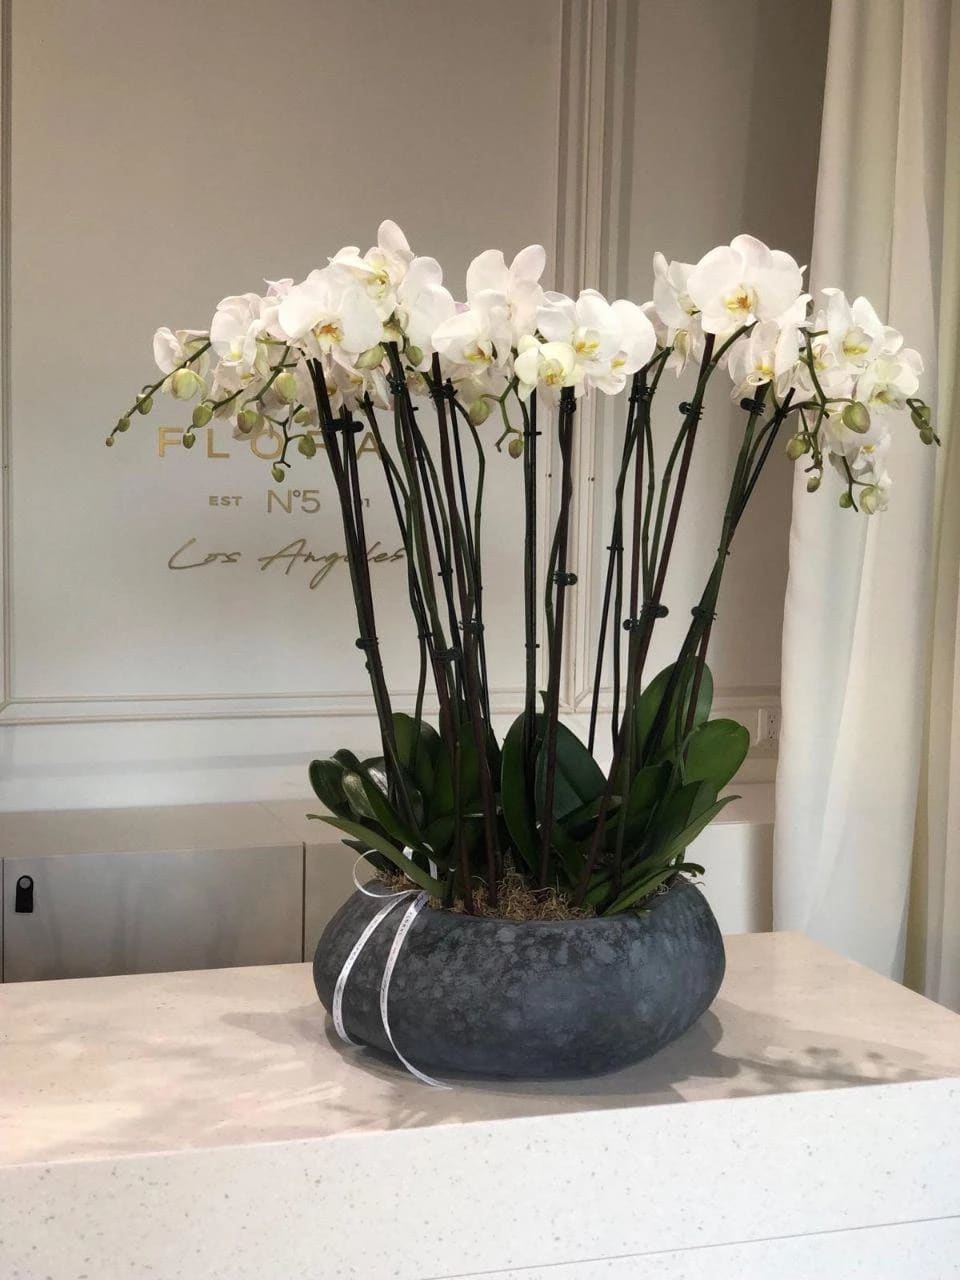 A magnificent single flower kind arrangement features white Orchids in a ceramic